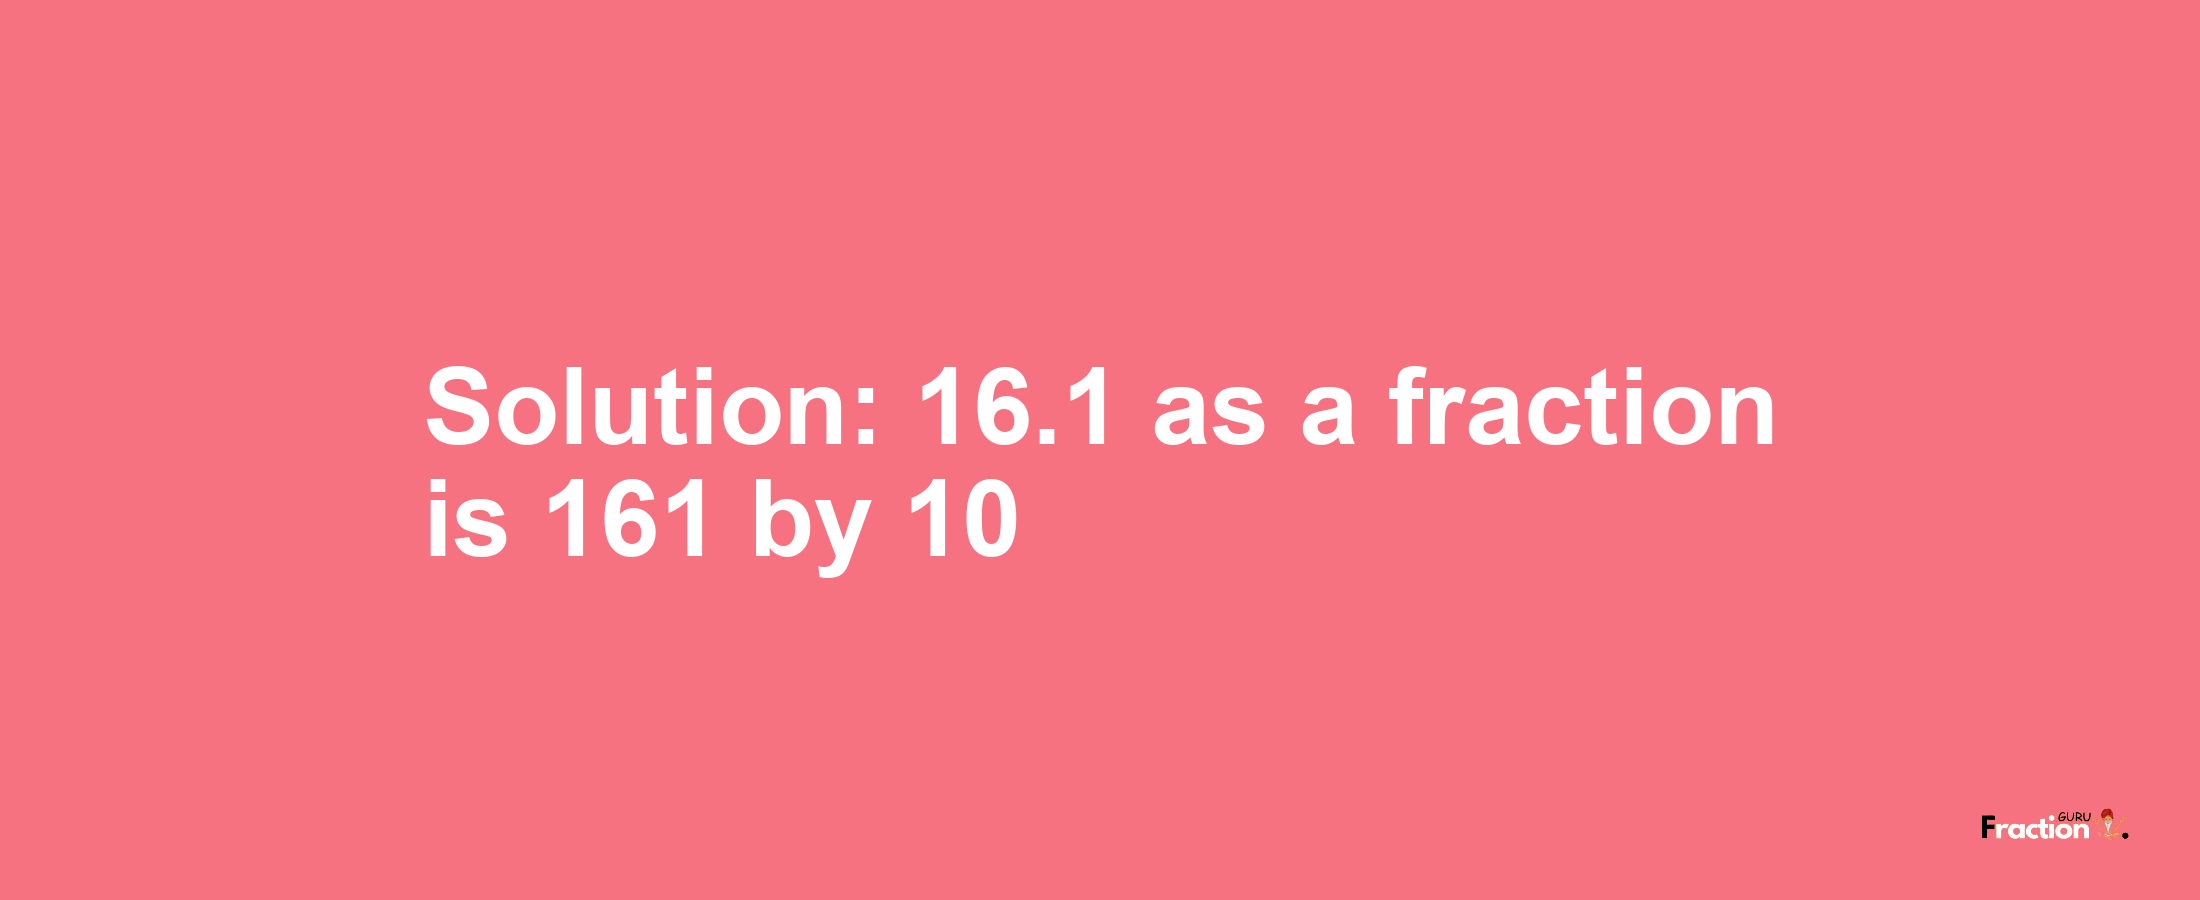 Solution:16.1 as a fraction is 161/10